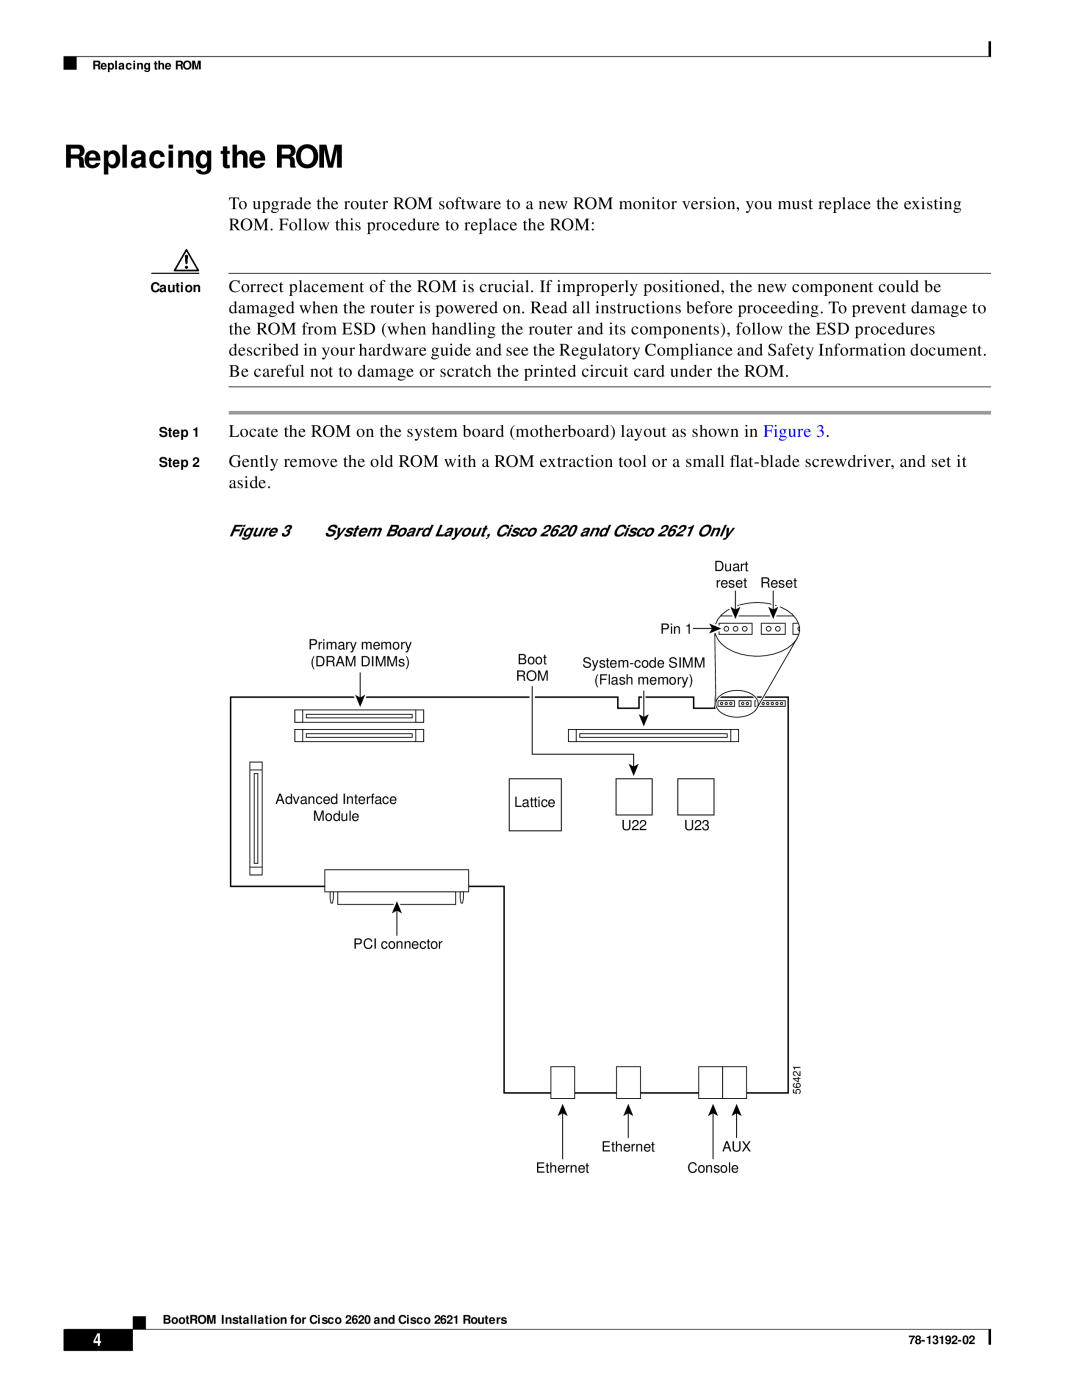 Cisco Systems manual Replacing the ROM, System Board Layout, Cisco 2620 and Cisco 2621 Only 